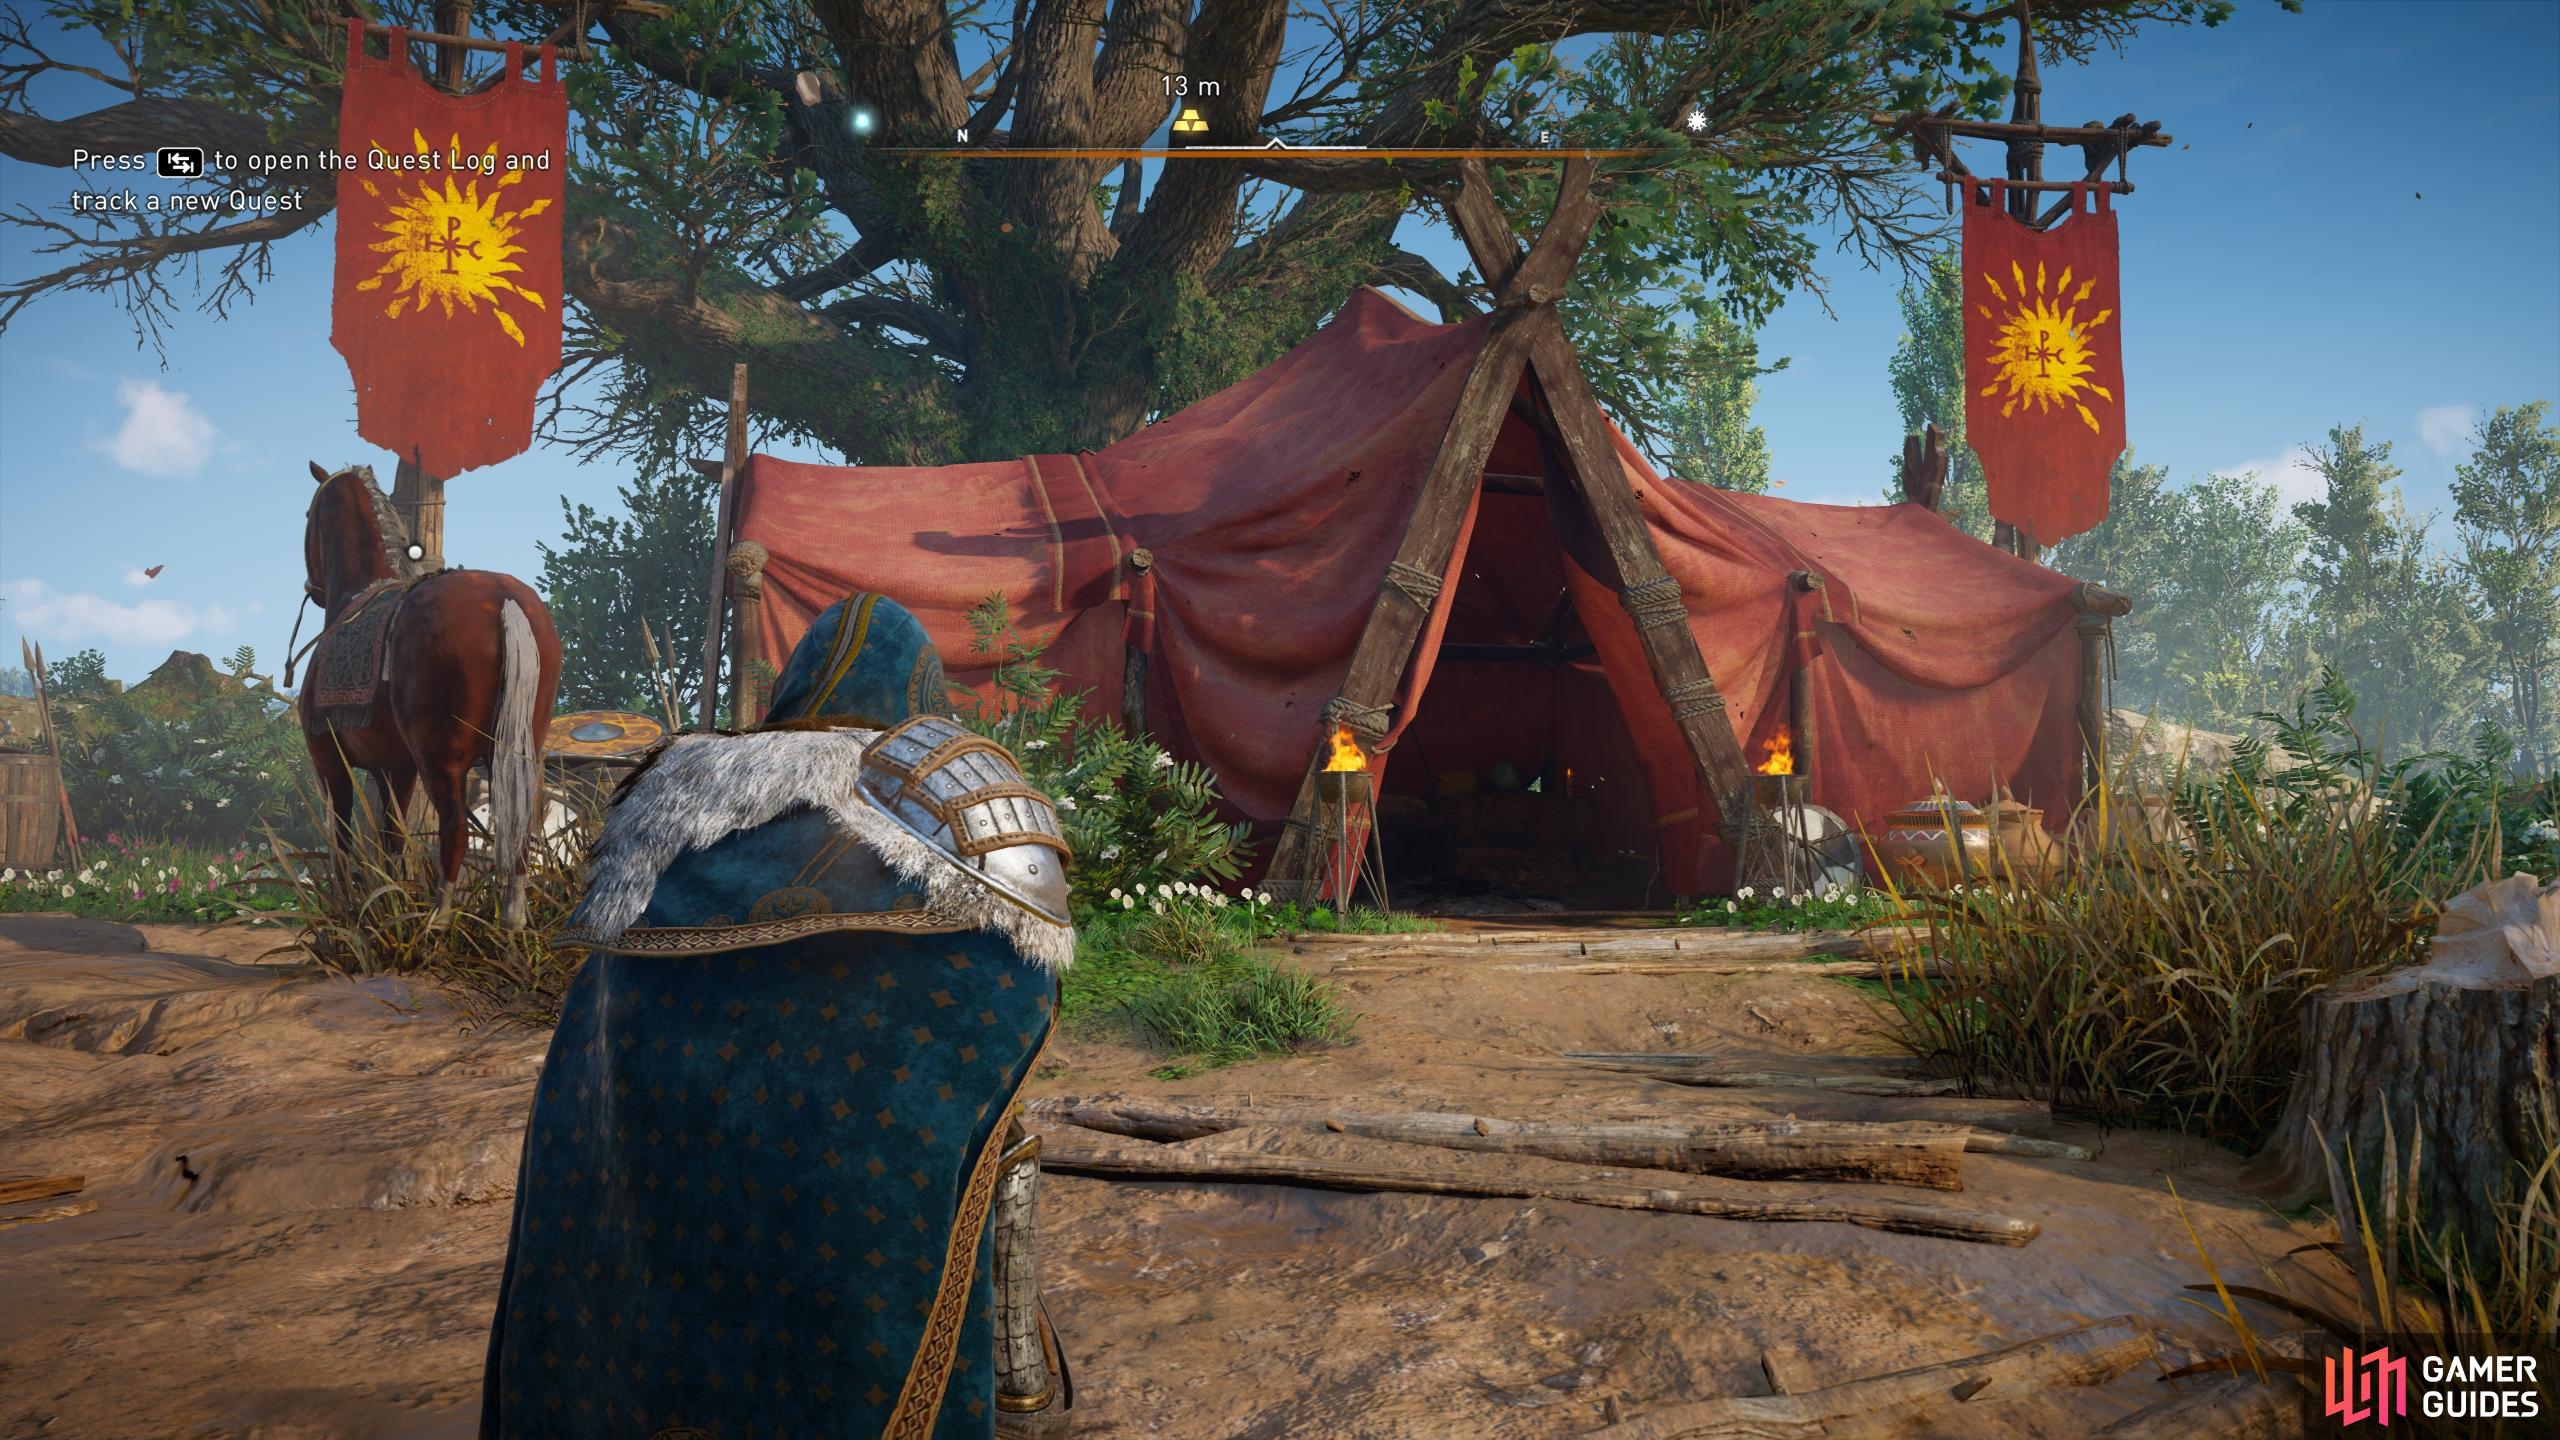 The chest is located in the large red tent with two banners either side of it.